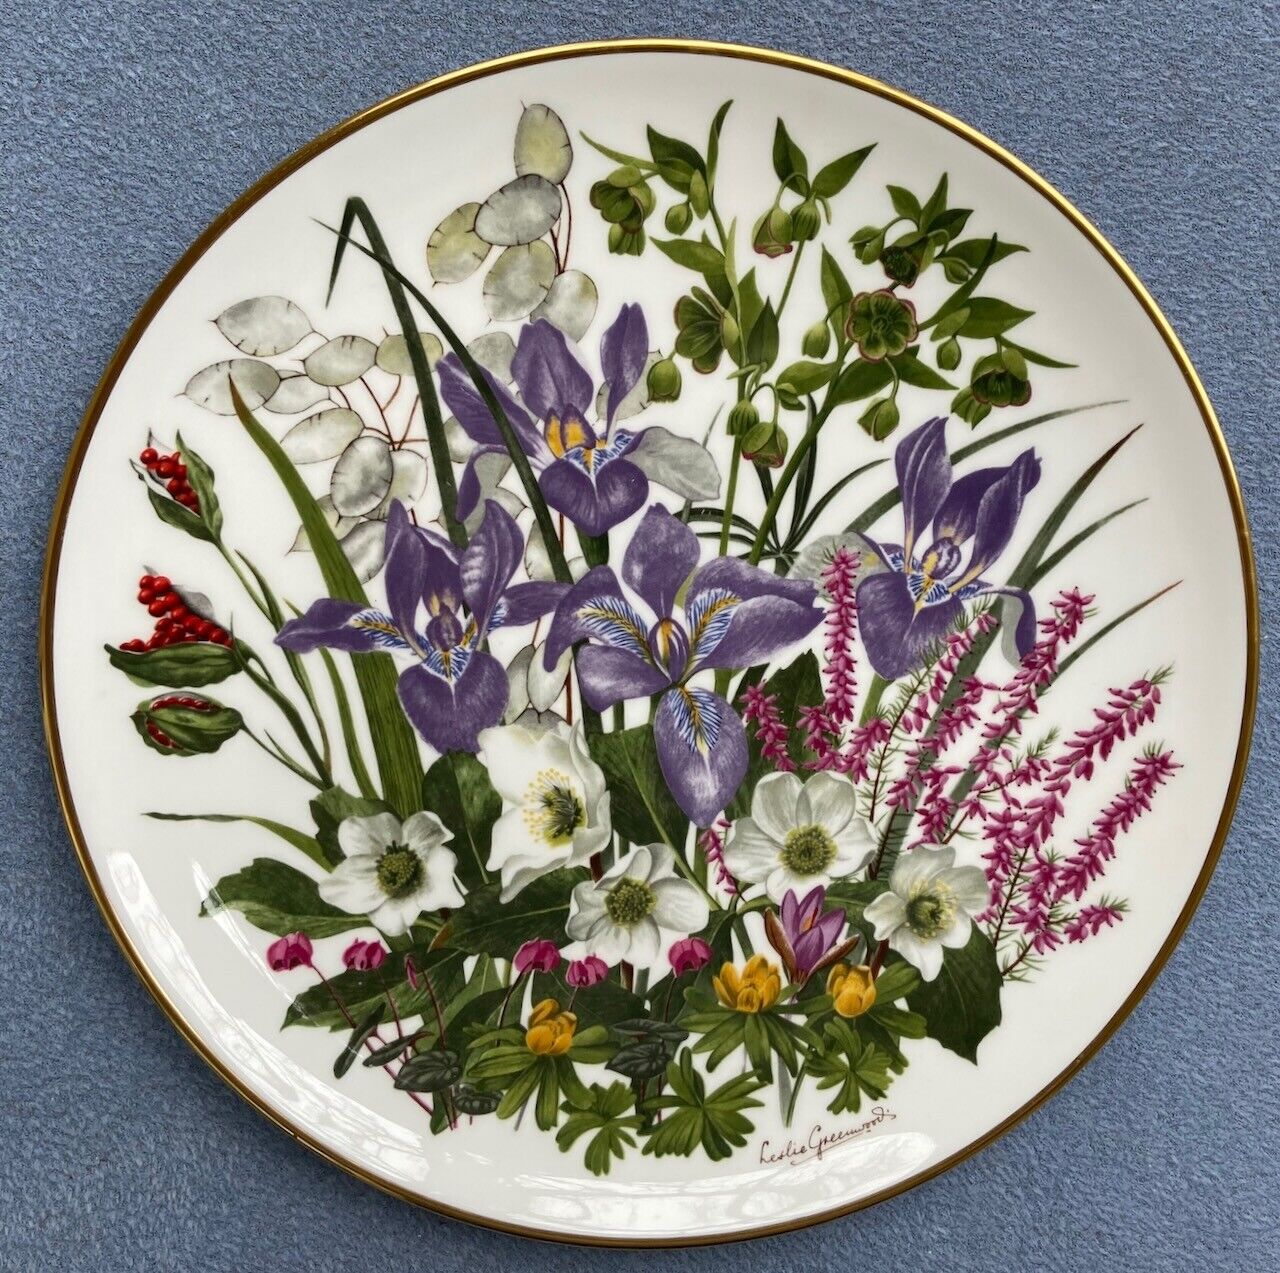 Wedgwood Franklin Porcelain Horticulture Society Flowers of the Year Plates 